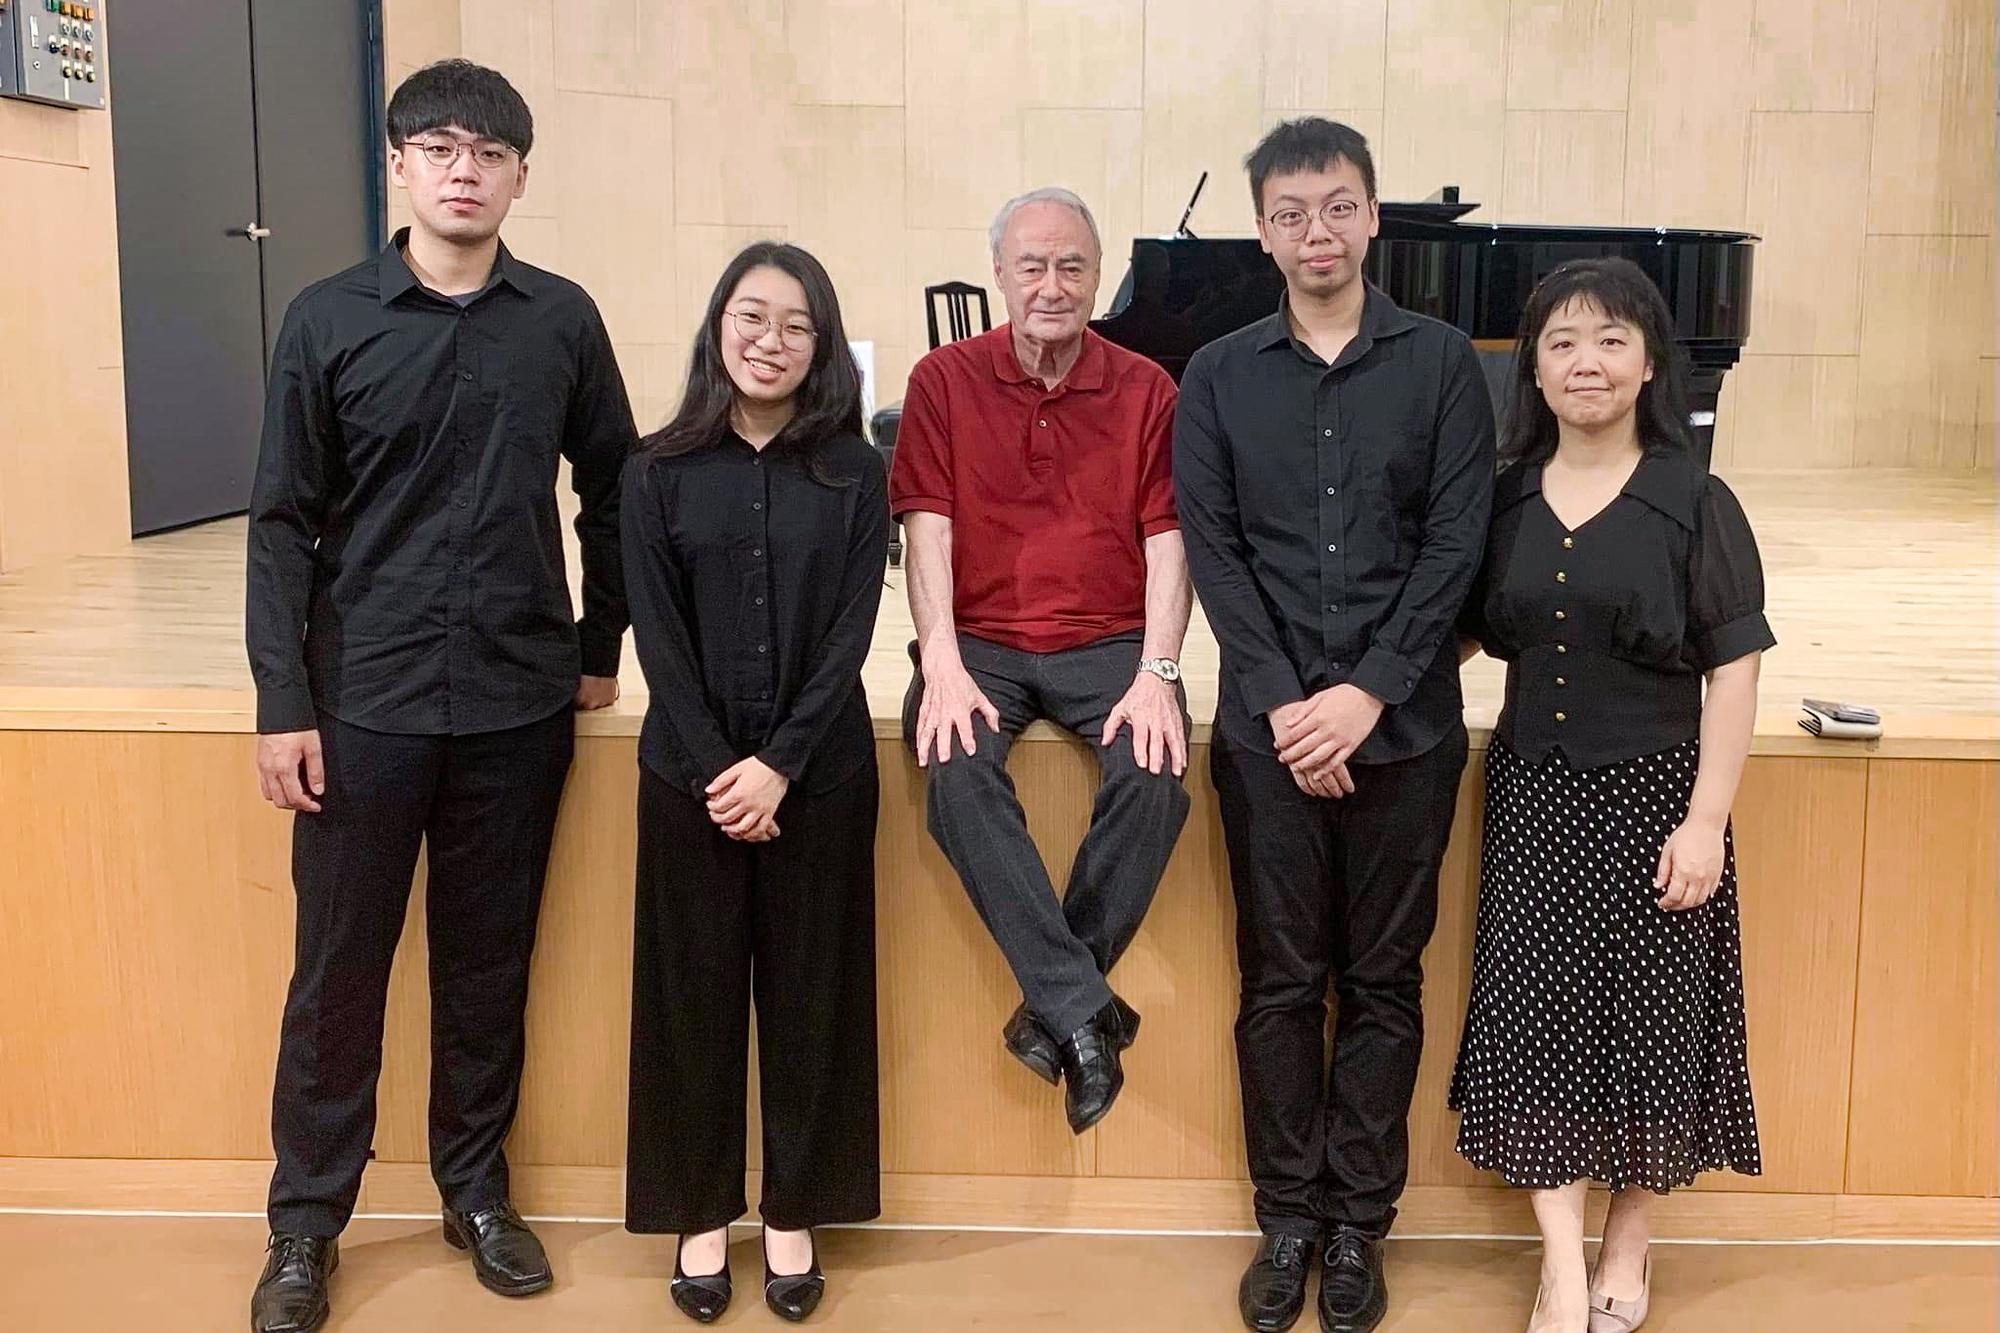 French virtuoso violinist Gérard Poulet (center) visited NTHU last year to mentor students.